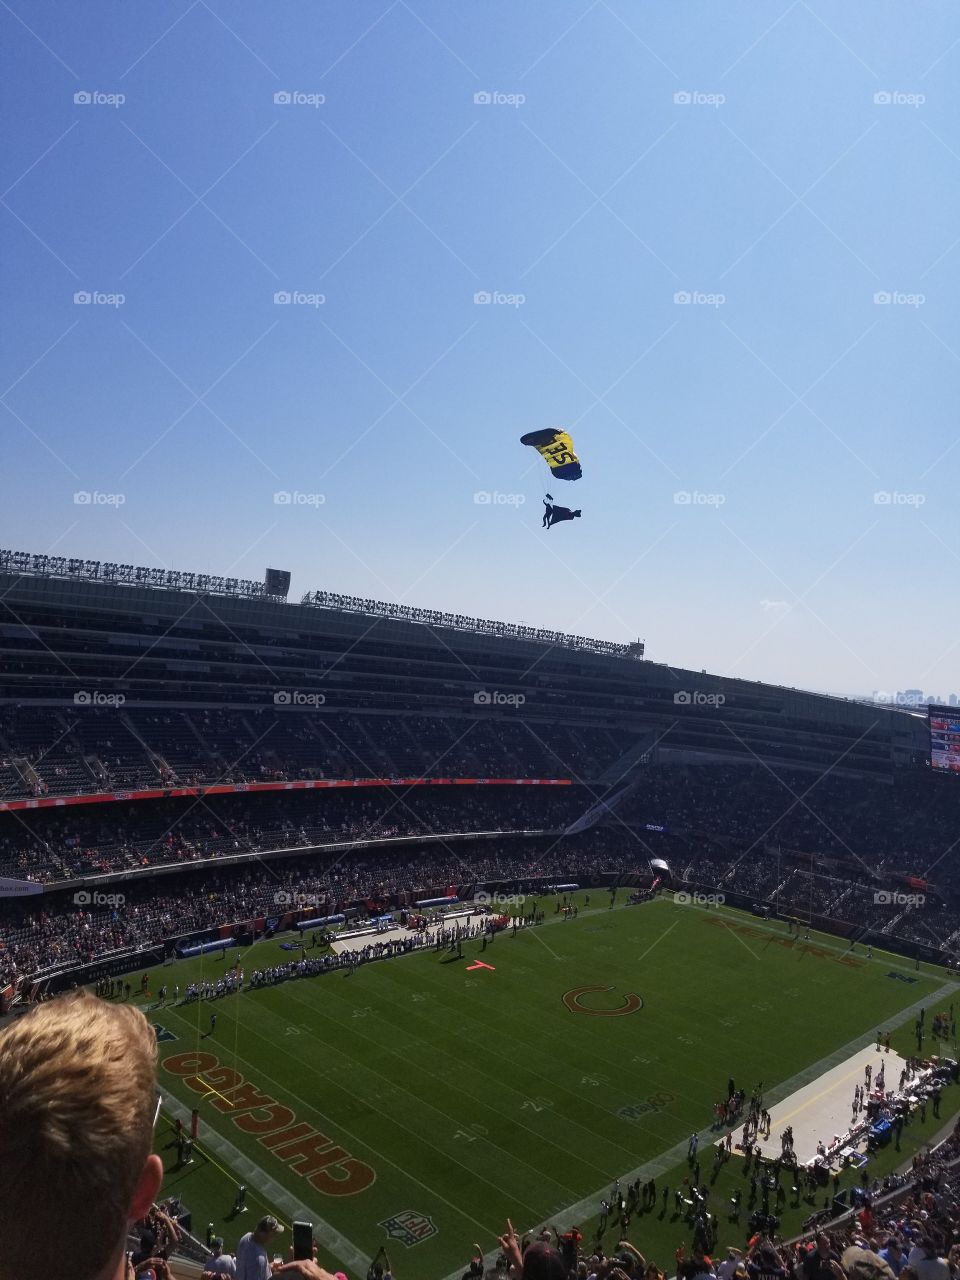 Navy Seal Parachuting into Soldier Field